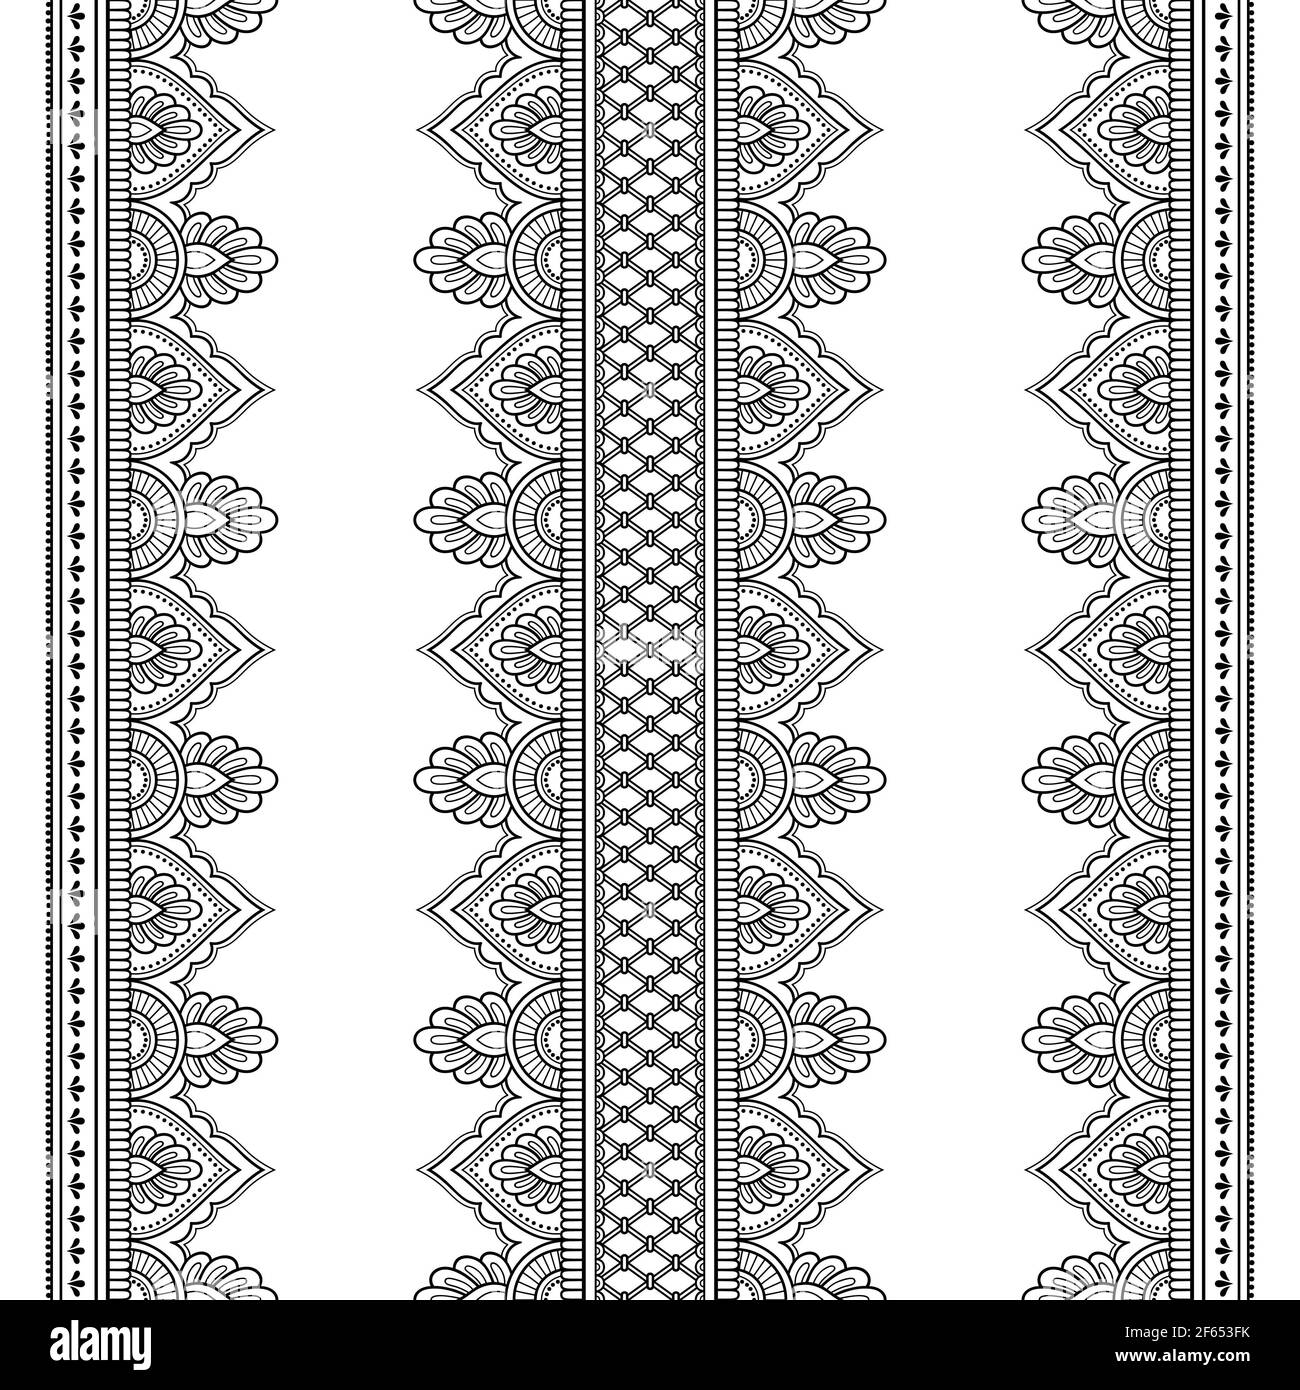 Seamless borders pattern for Mehndi, Henna drawing and tattoo ...